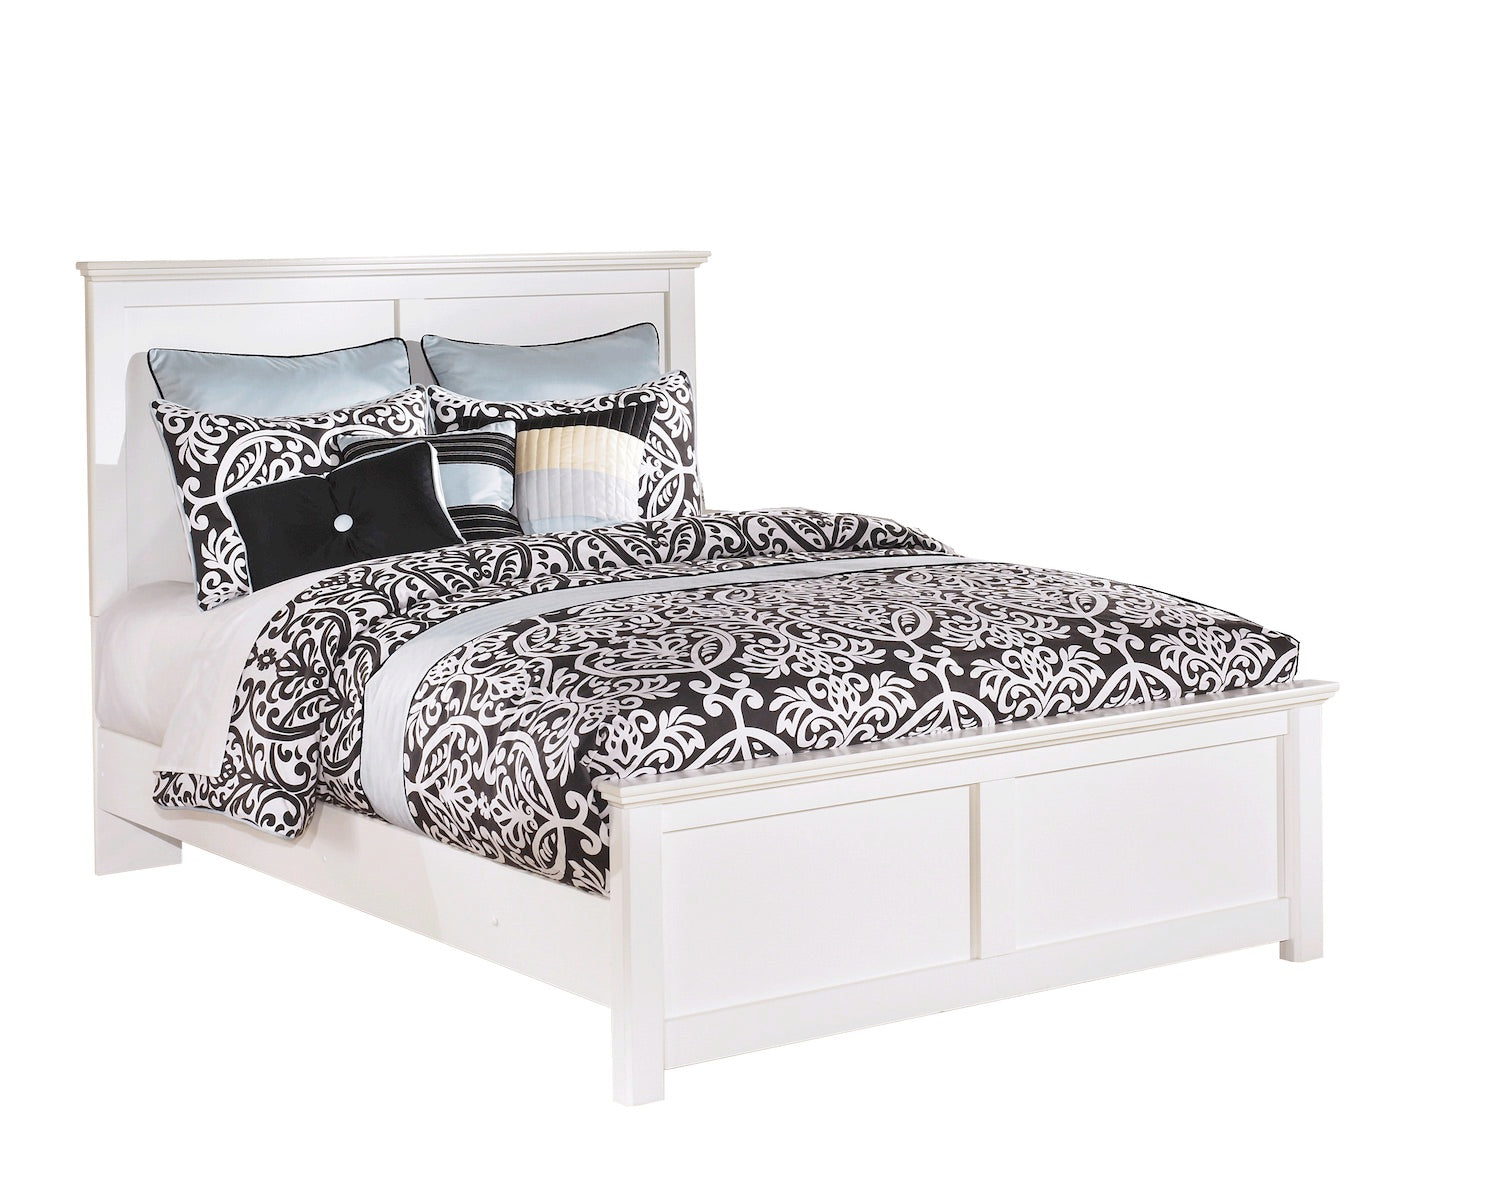 Ashley Bostwick Shoals 5 PC E King Panel Headboard Bedroom Set with two Nightstands in White - The Furniture Space.